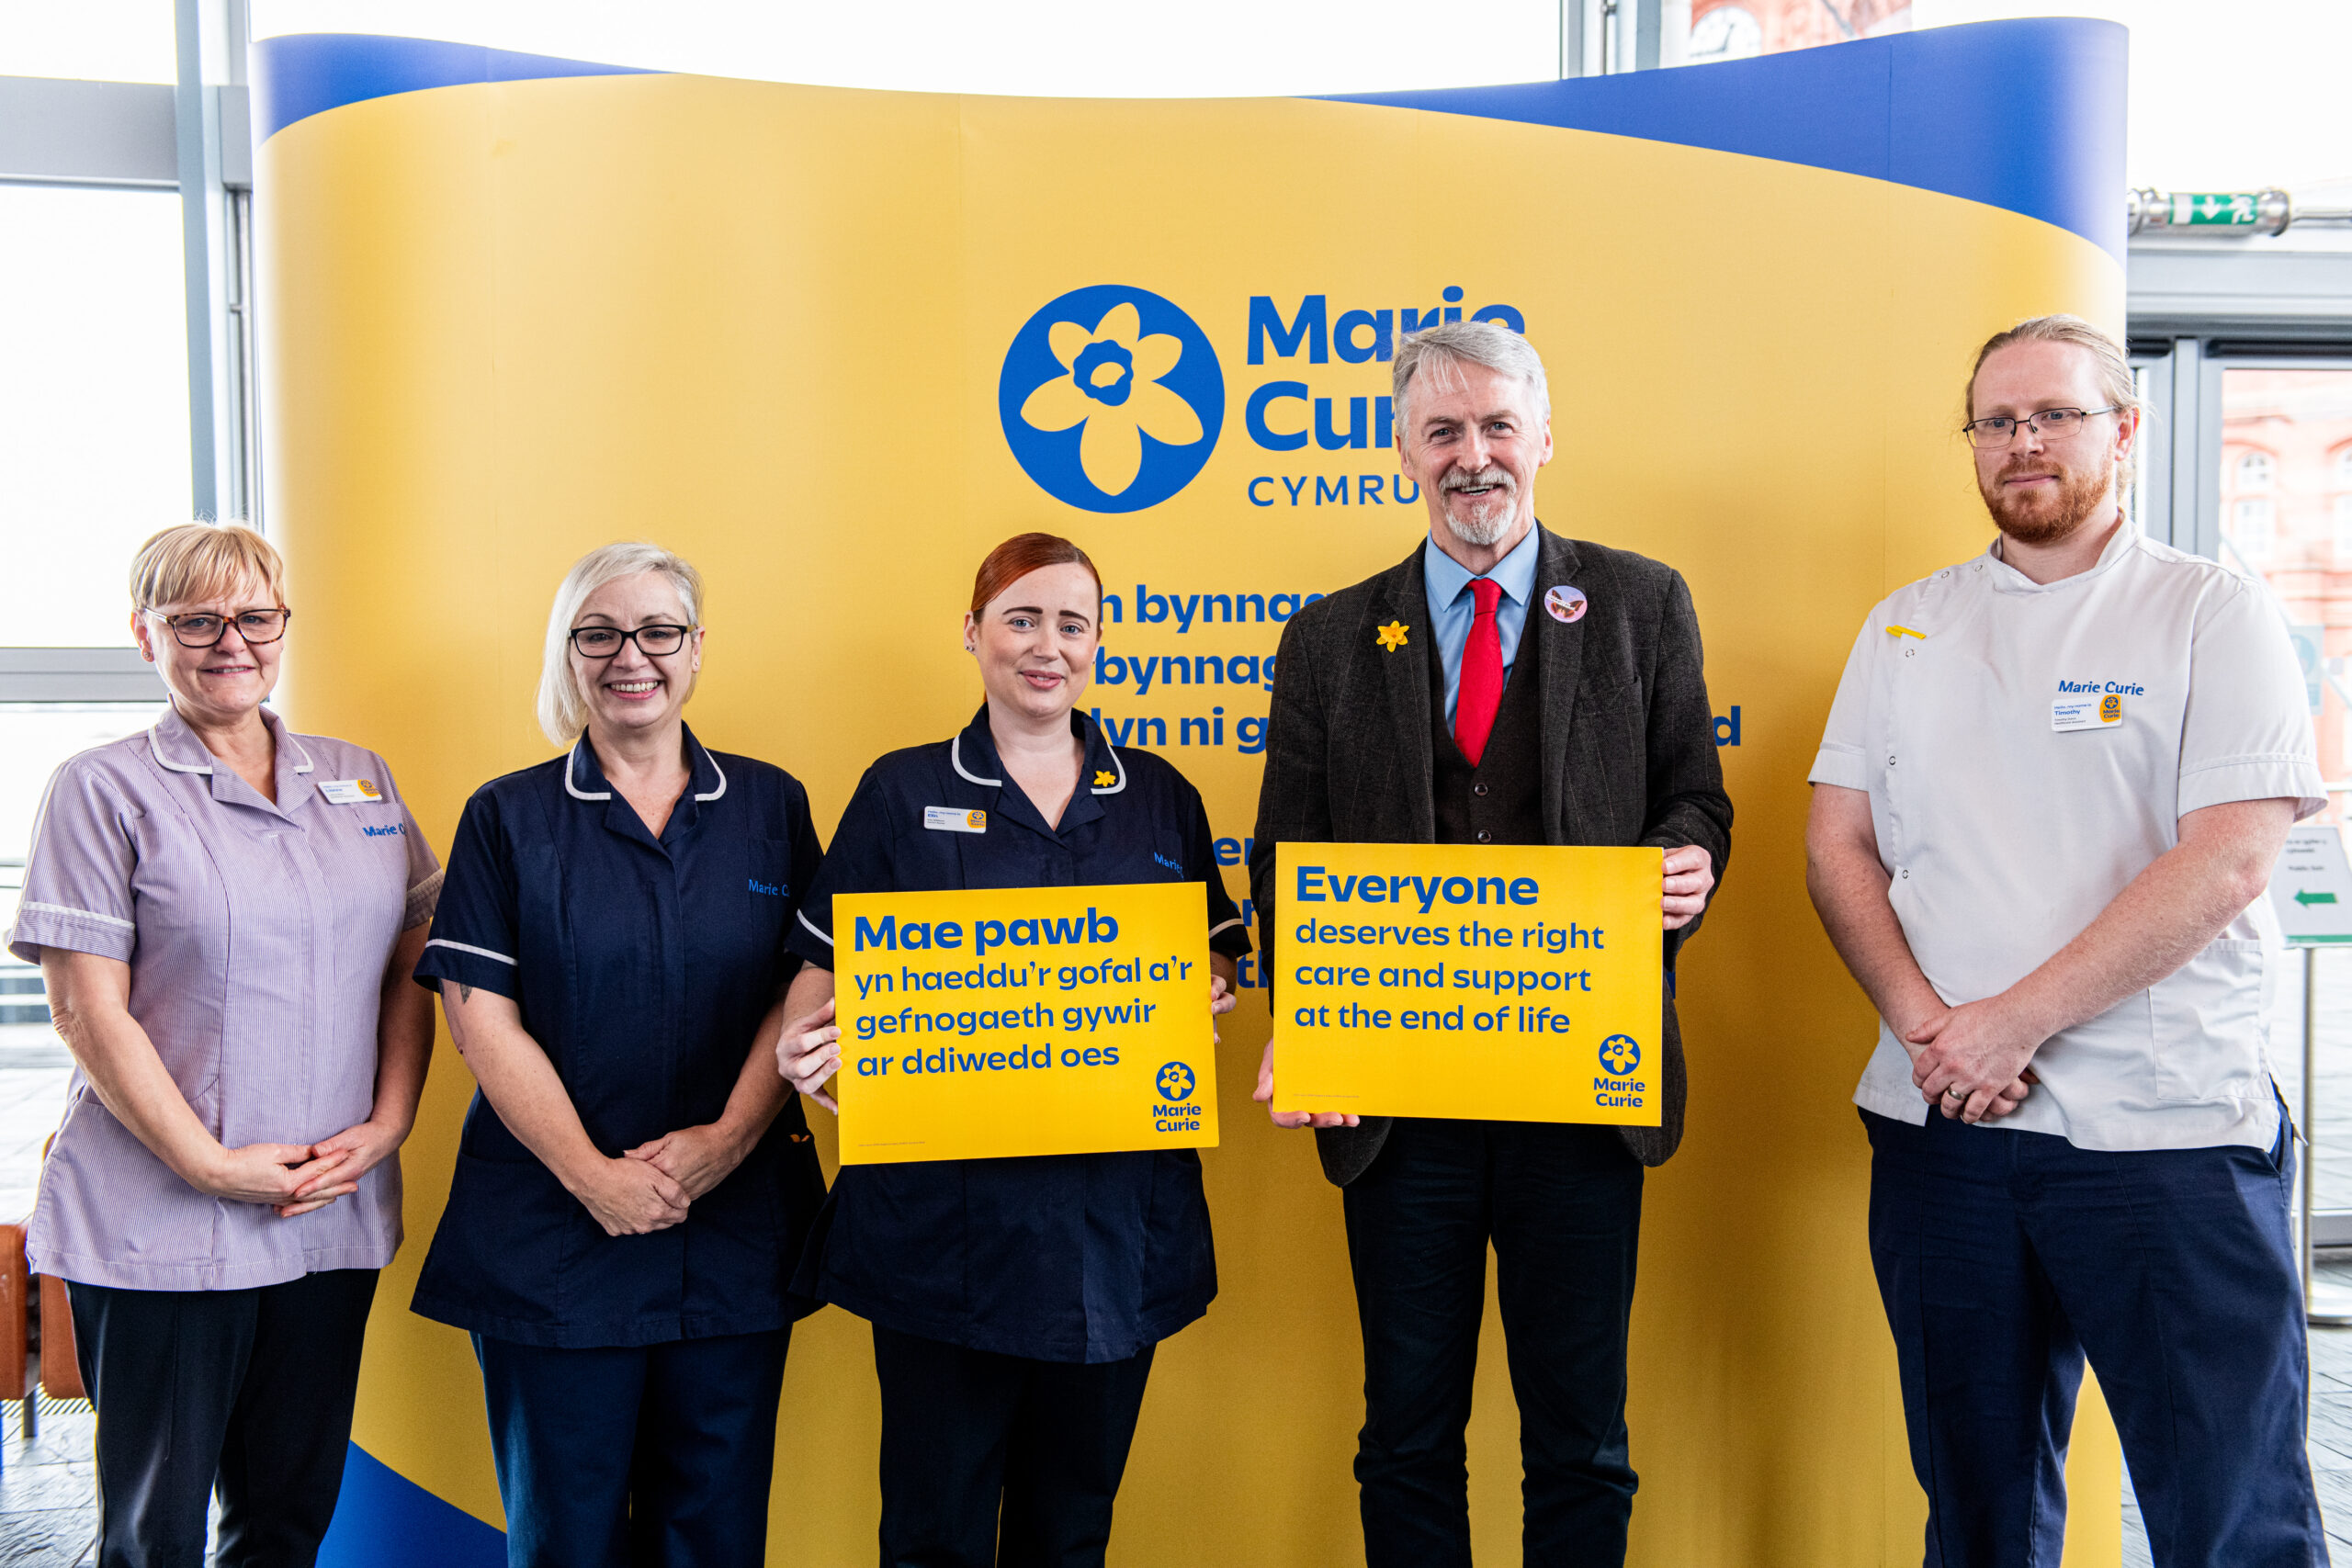 Ogmore MS Urges Residents to Support Marie Curie’s End-of-Life Care Appeal